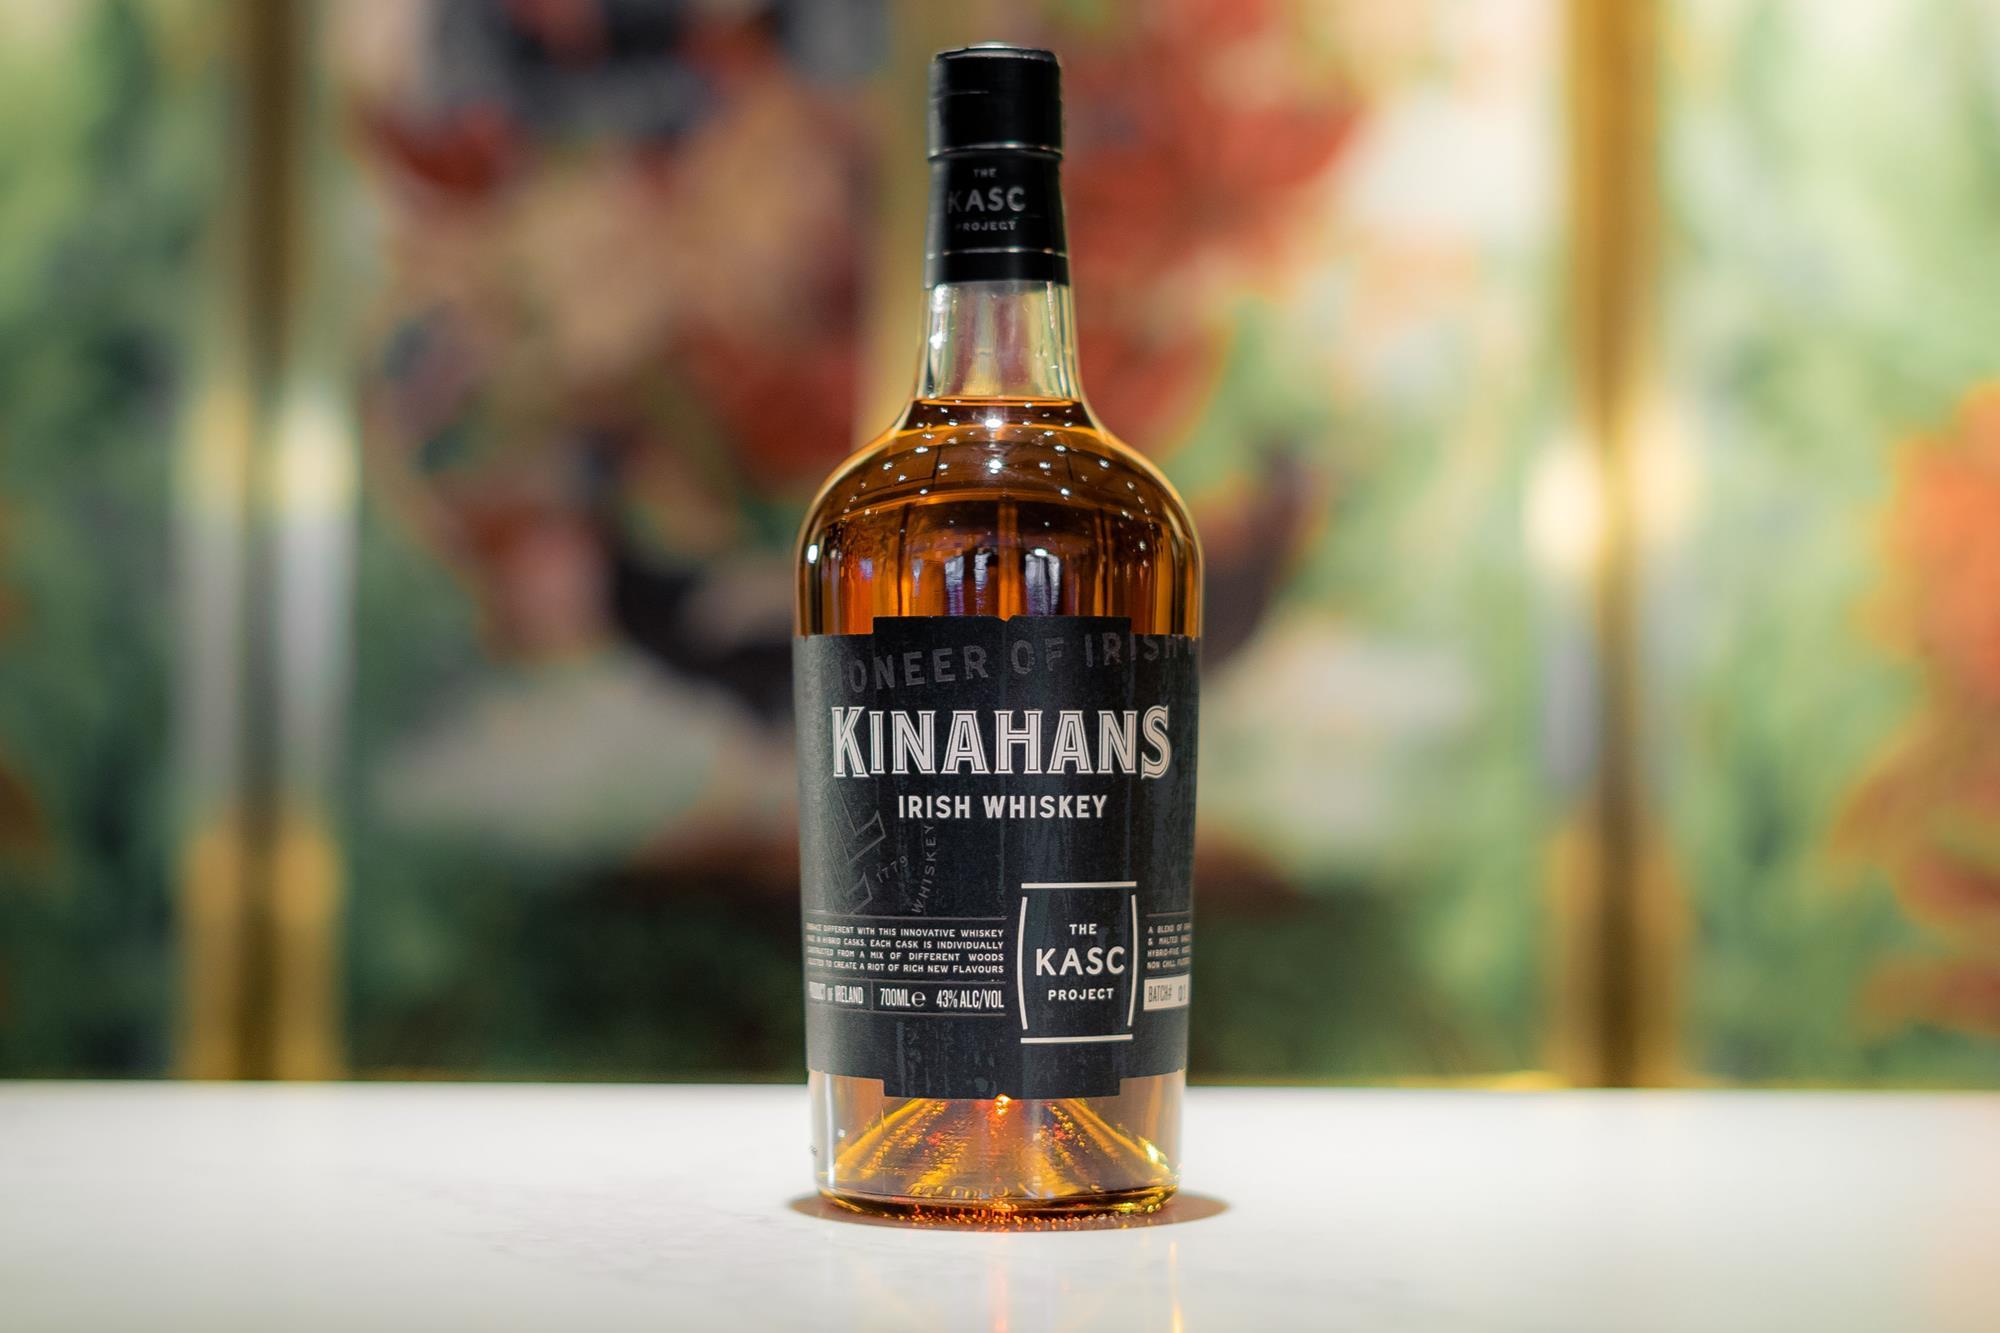 Kinahan's launches 'hybrid' The Kasc Project whiskey | News | The Grocer